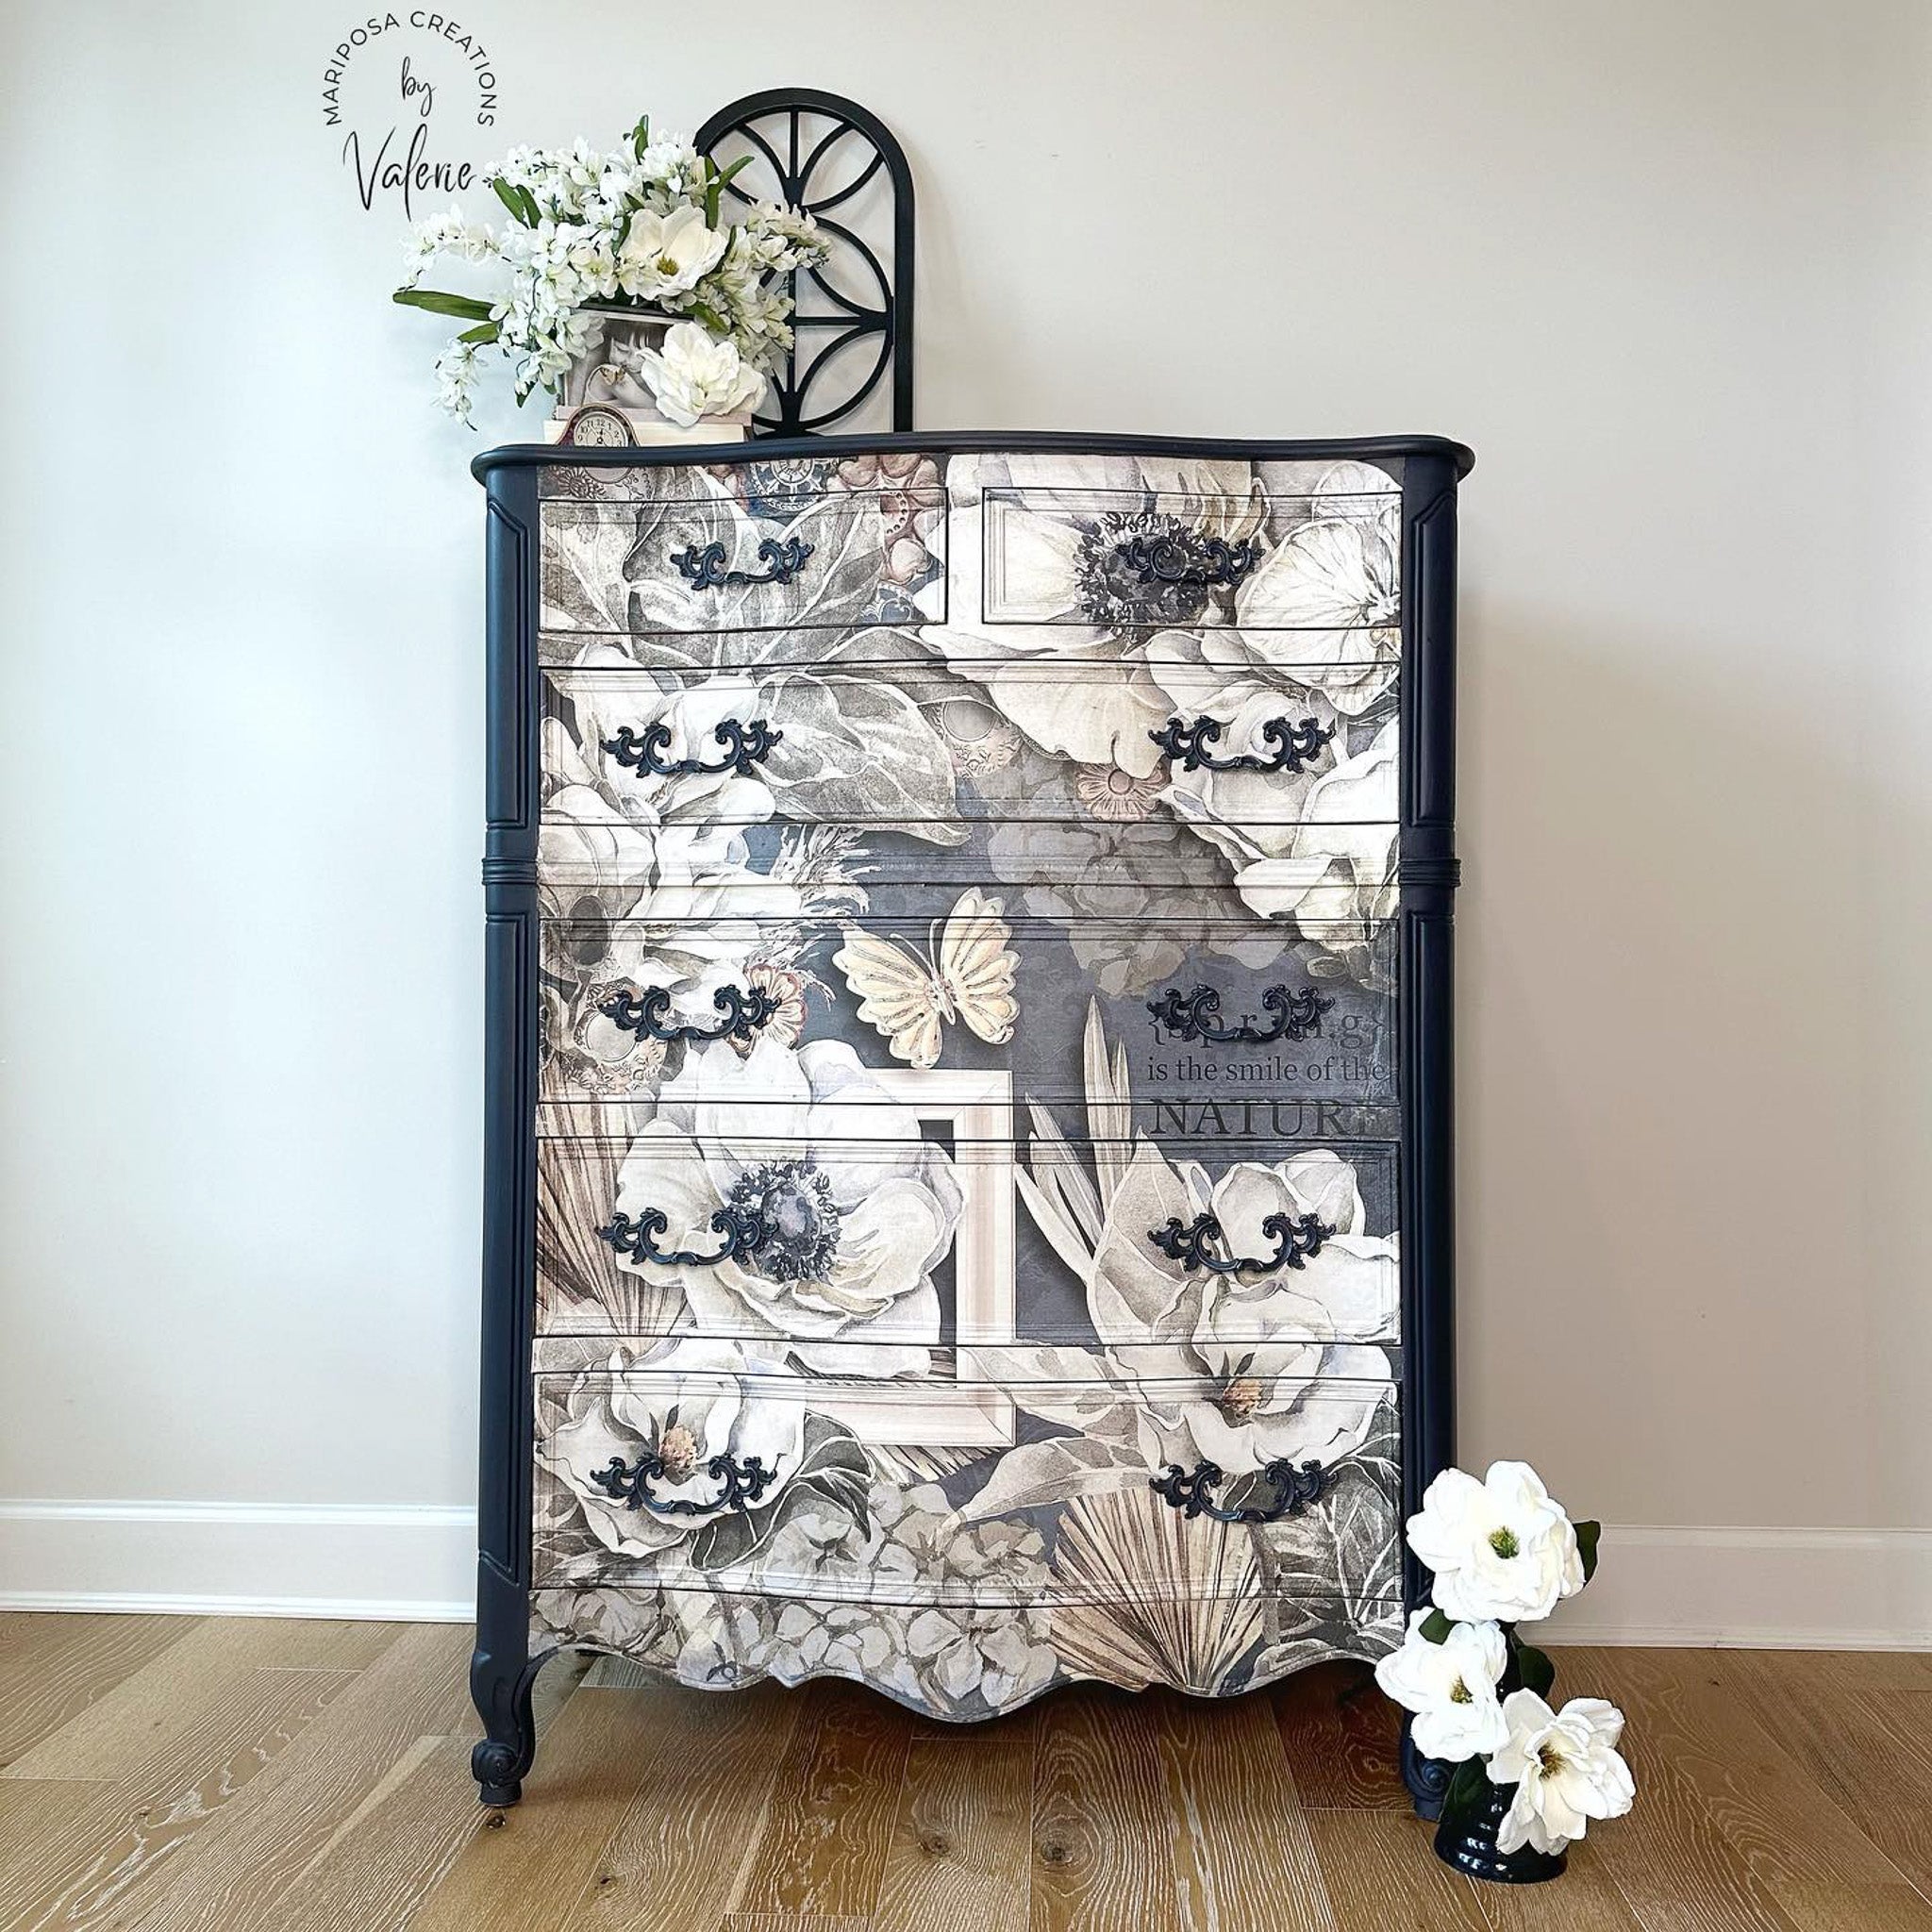 A vintage chest dresser refurbished by Mariposa Creations by Valerie is painted navy blue and features Decoupage Queen's Sugar Magnolia A0 rice paper on the whole front side.